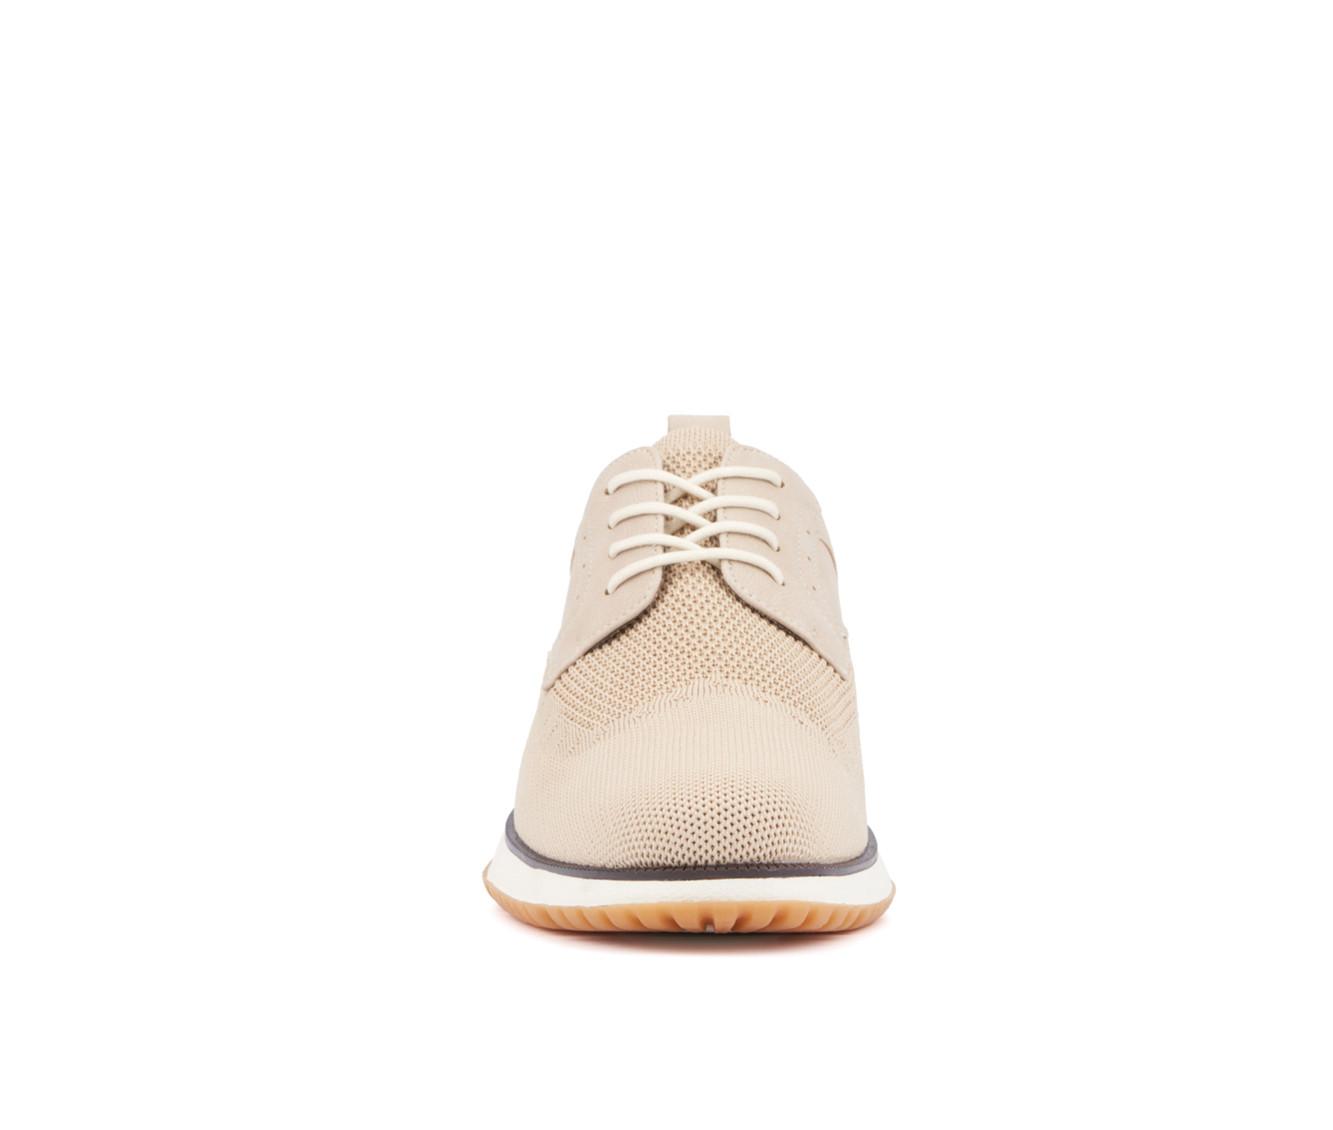 Men's New York and Company Wiley Casual Oxfords